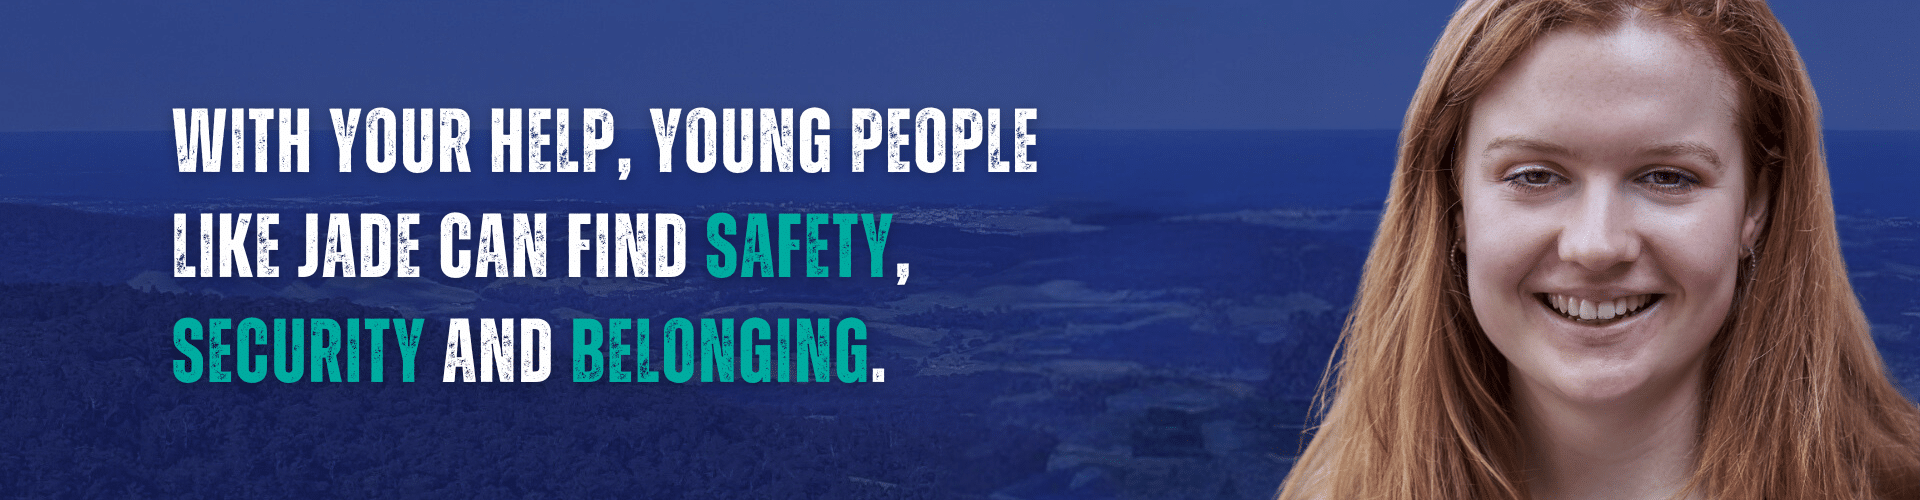 With your help, young people like Jade can find safety, security and belonging.